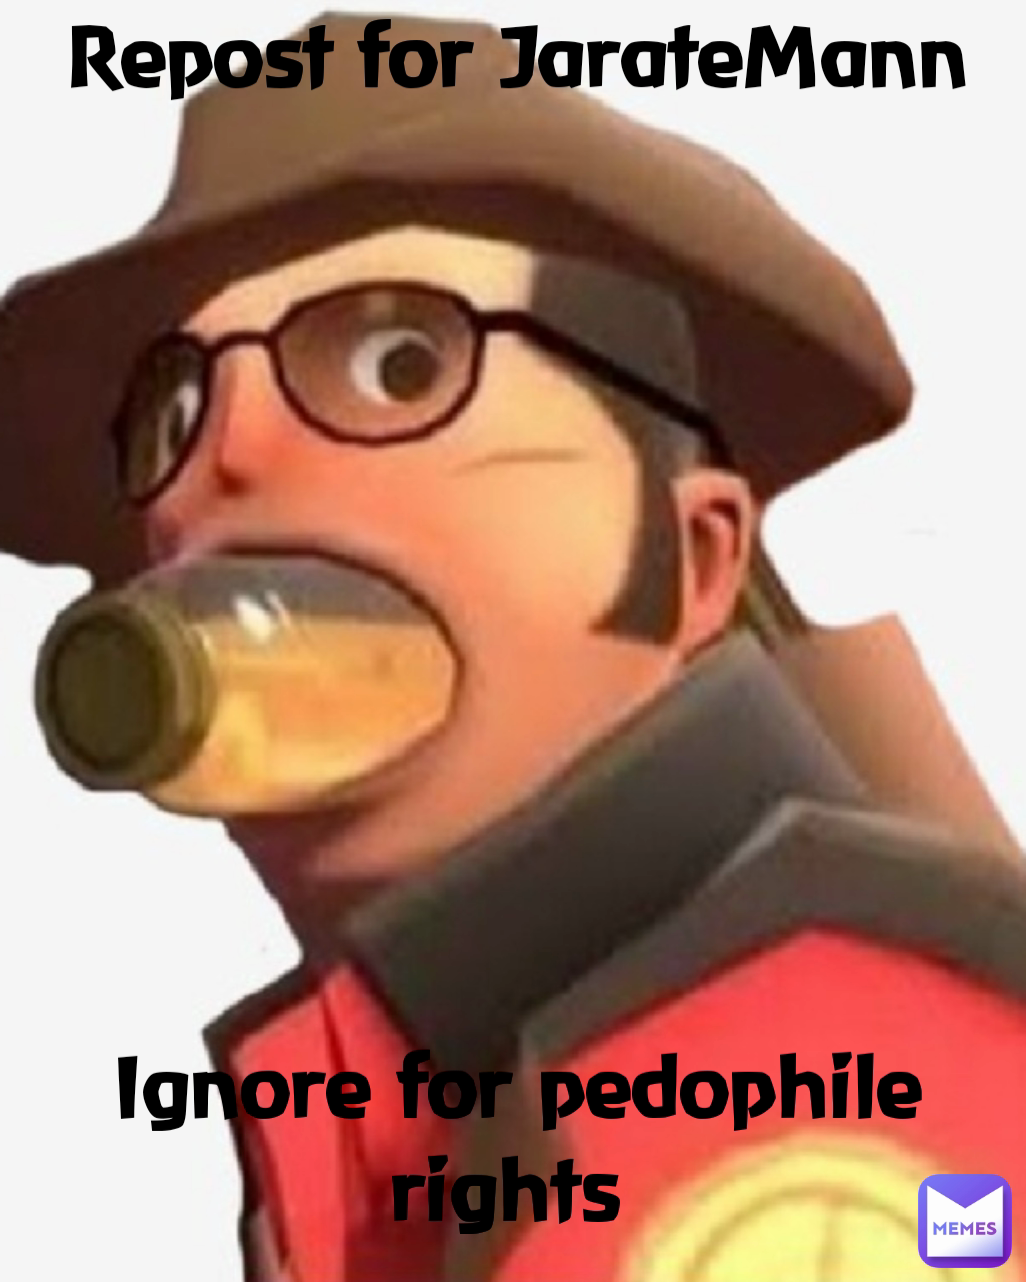 
Repost for JarateMann









Ignore for pedophile rights 